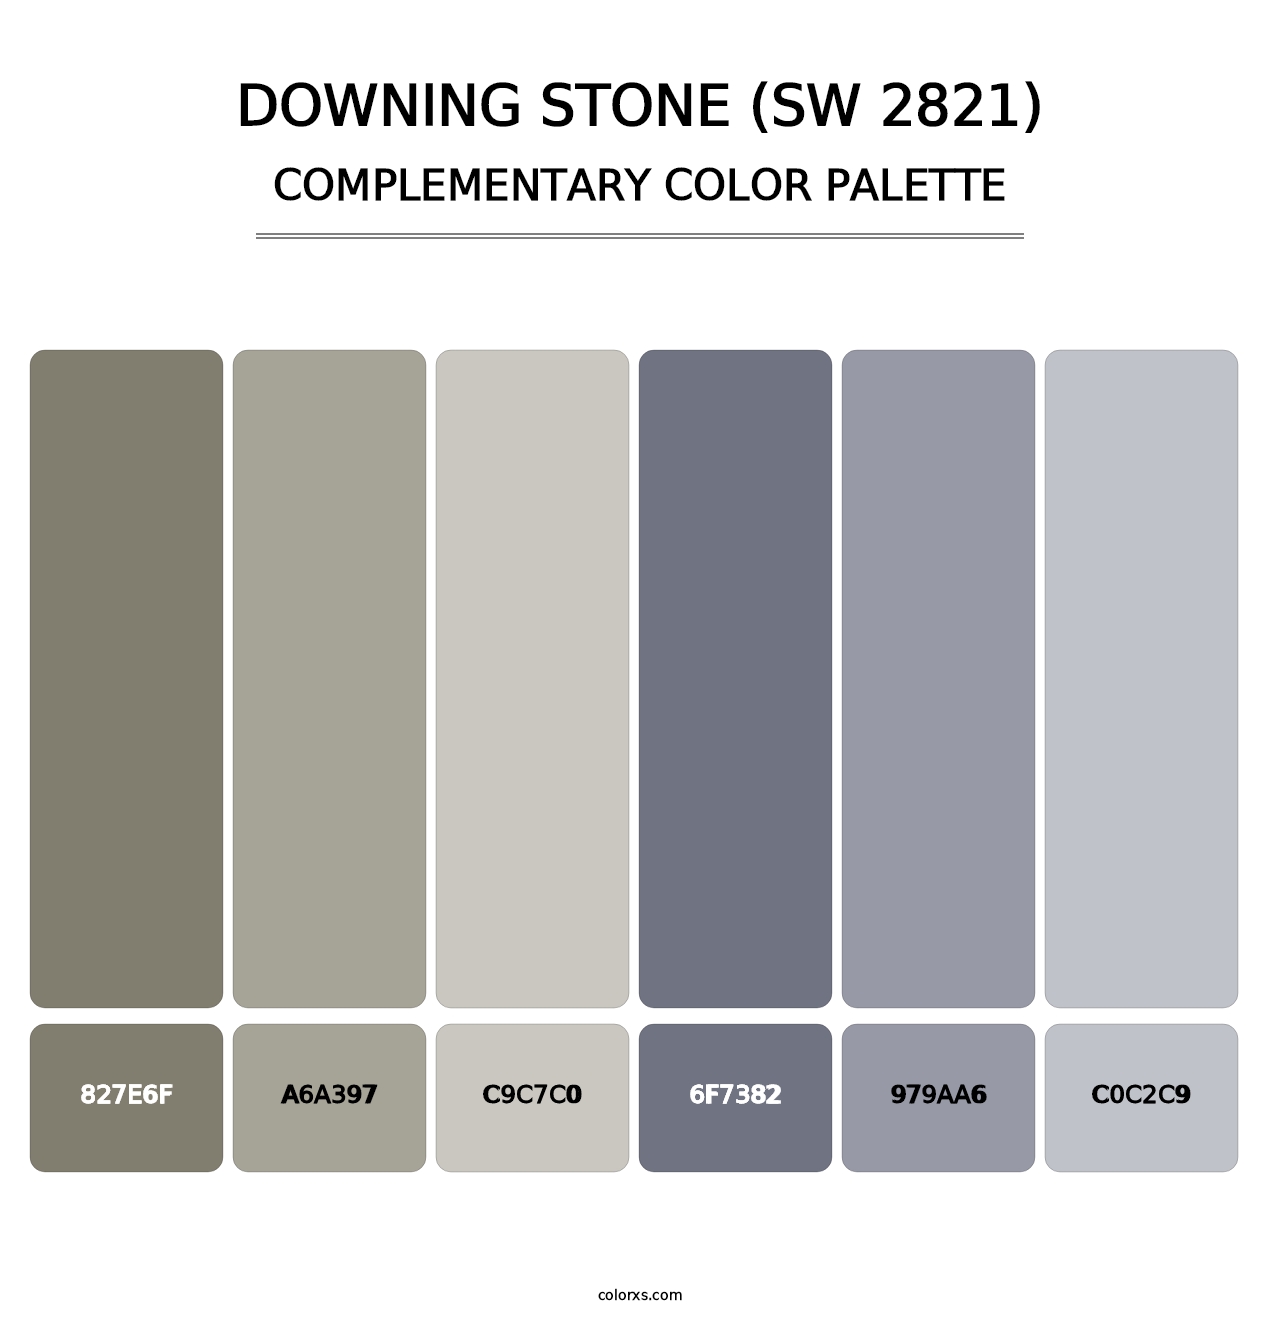 Downing Stone (SW 2821) - Complementary Color Palette